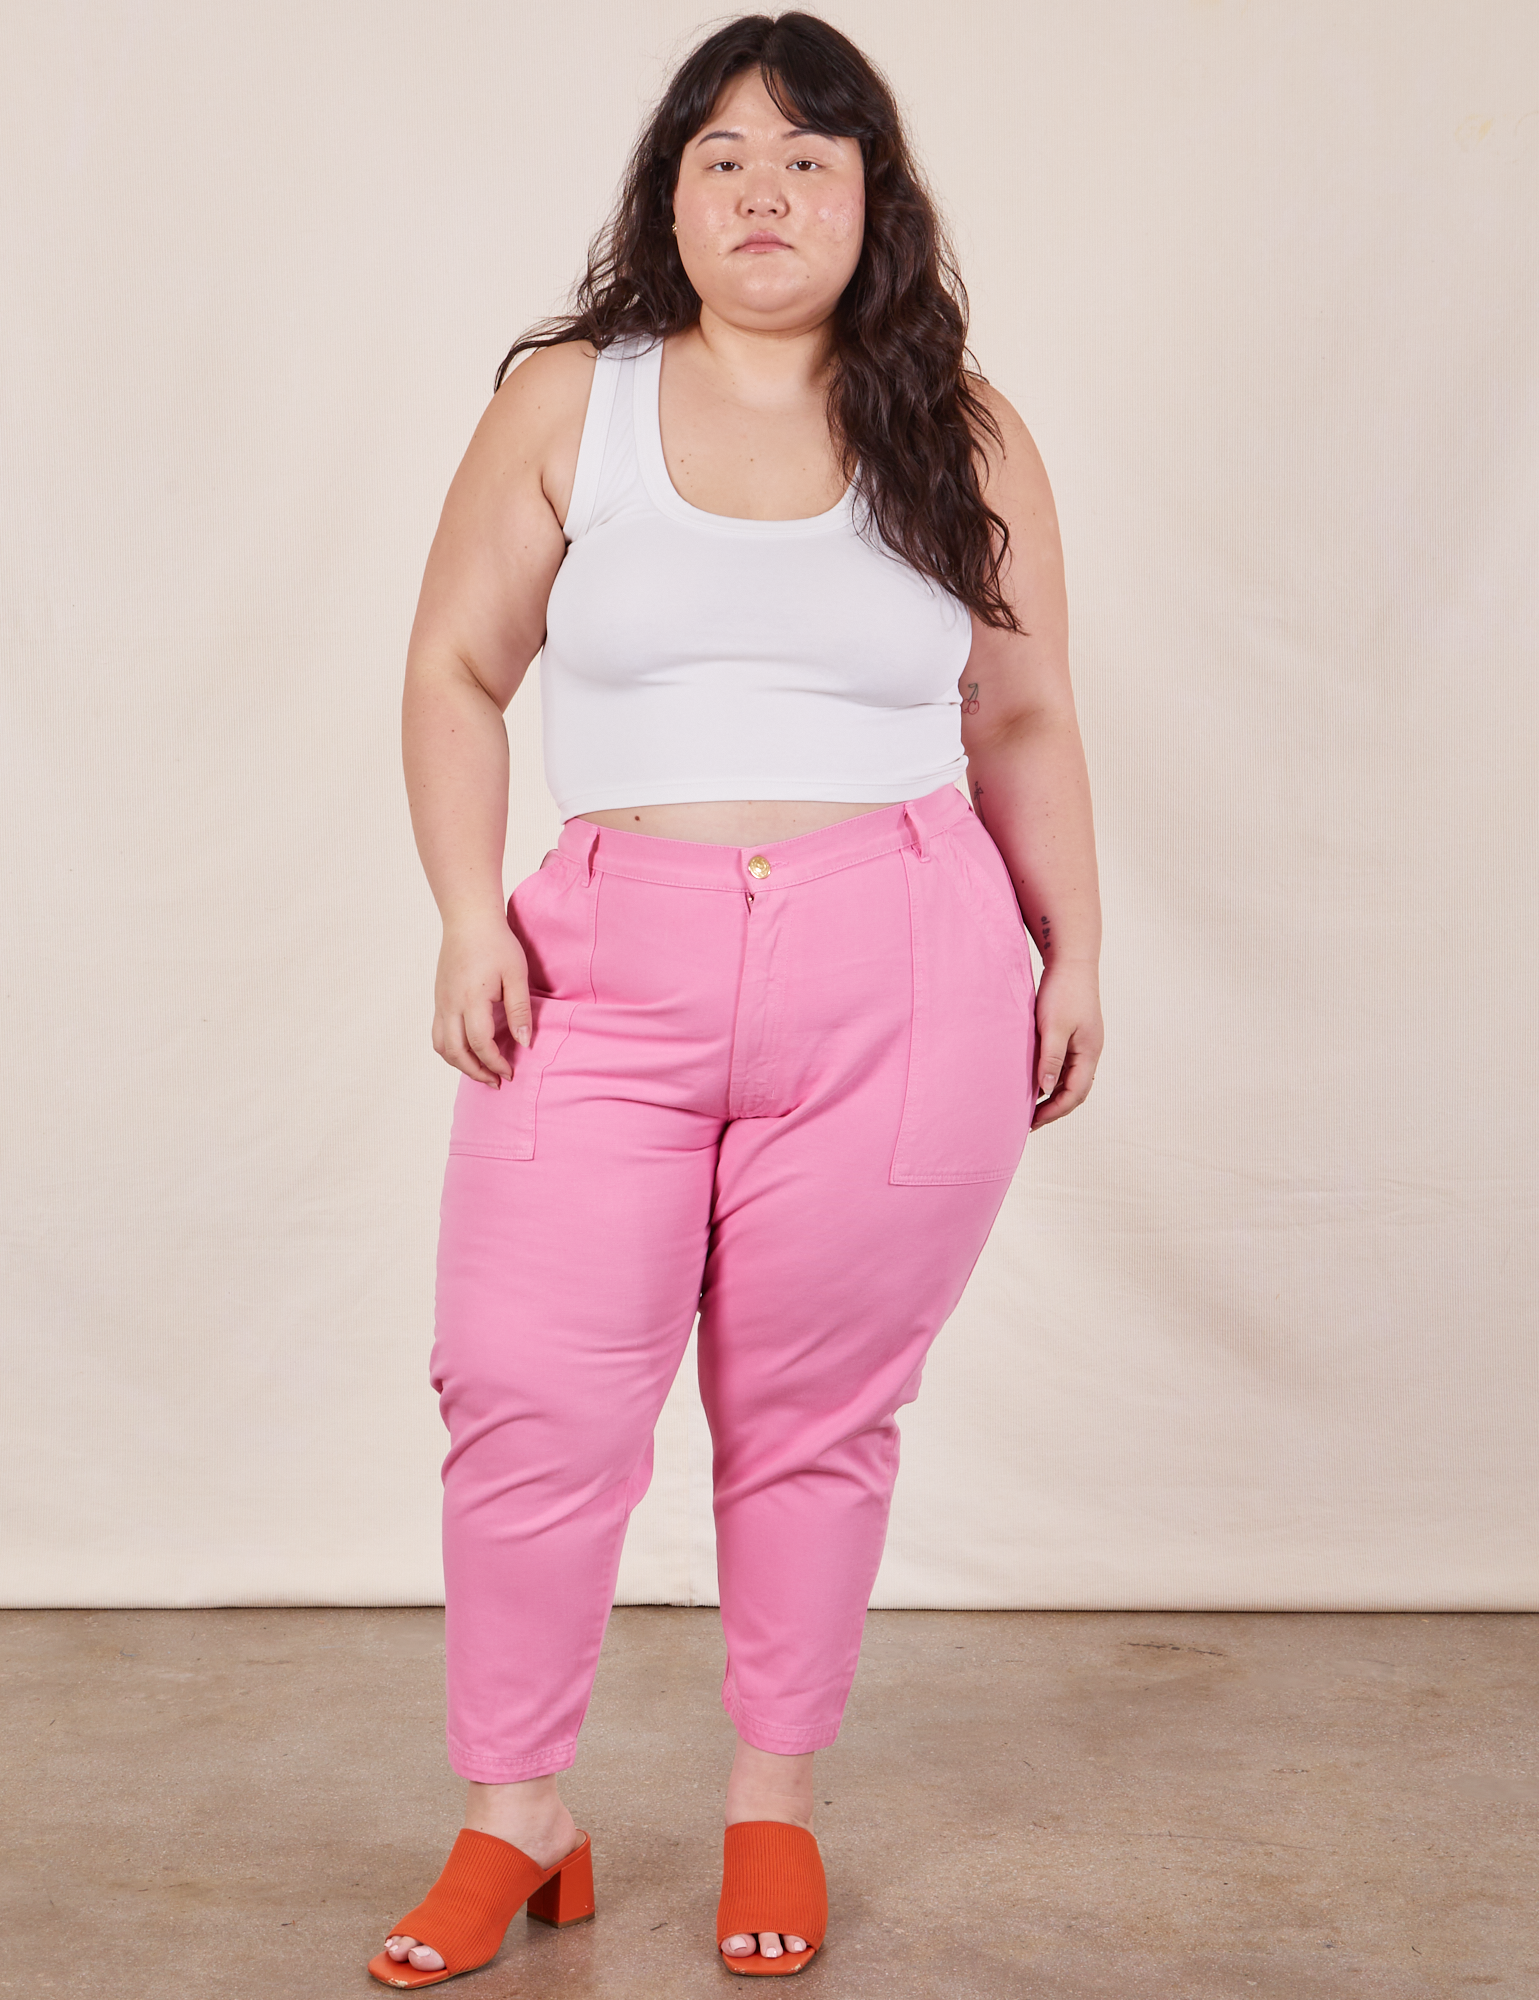 Ashley is 5&#39;7&quot; and wearing 1XL Petite Pencil Pants in Bubblegum Pink paired with vintage off-white Cropped Tank Top